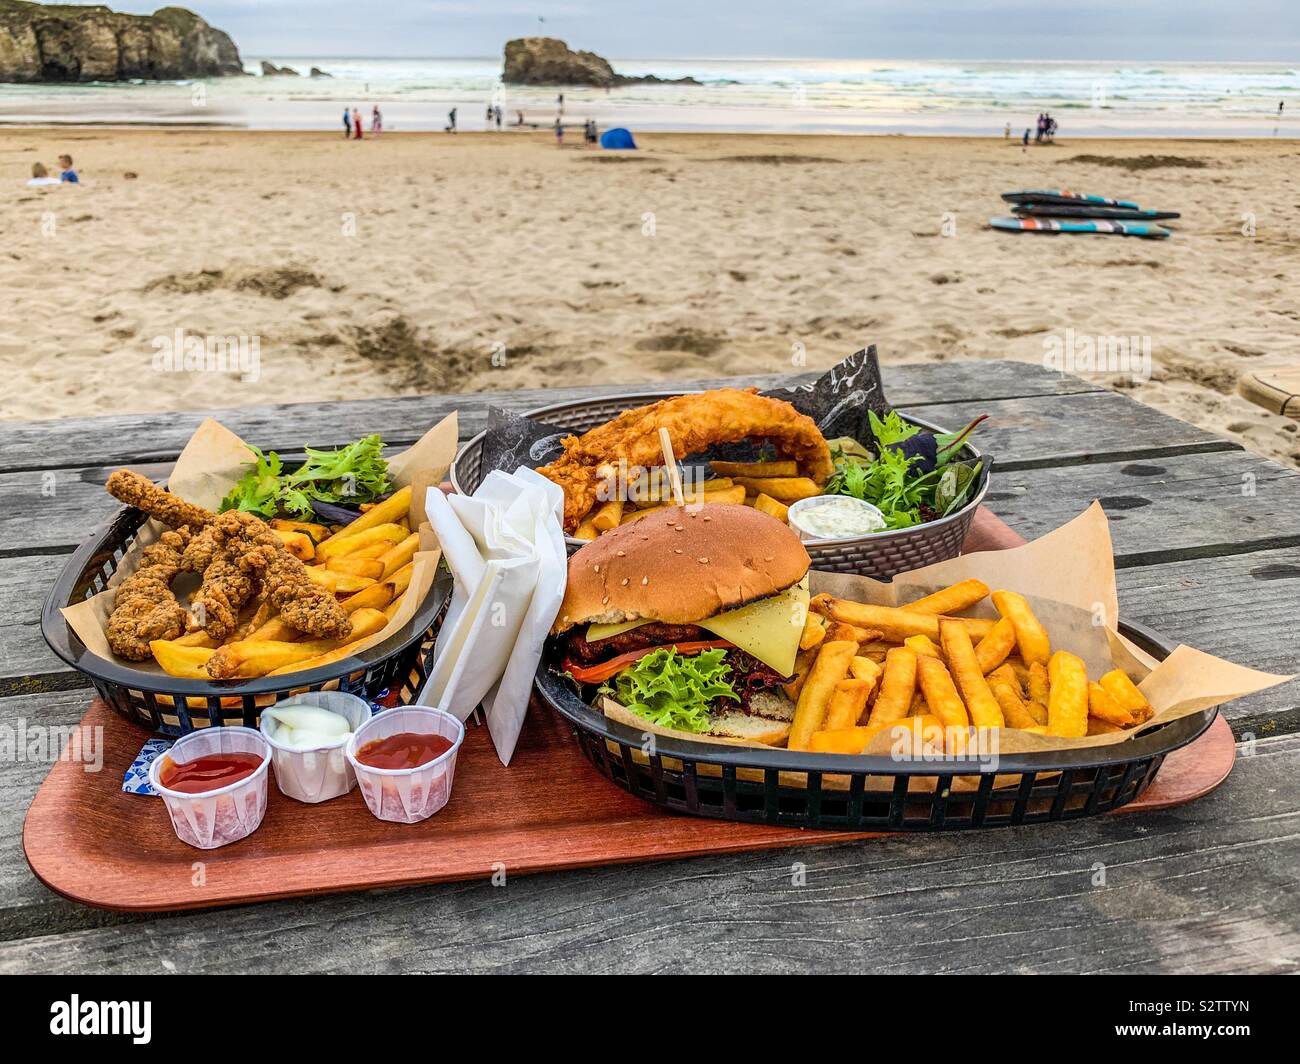 Tasty fast food served on a beach in Cornwall Stock Photo